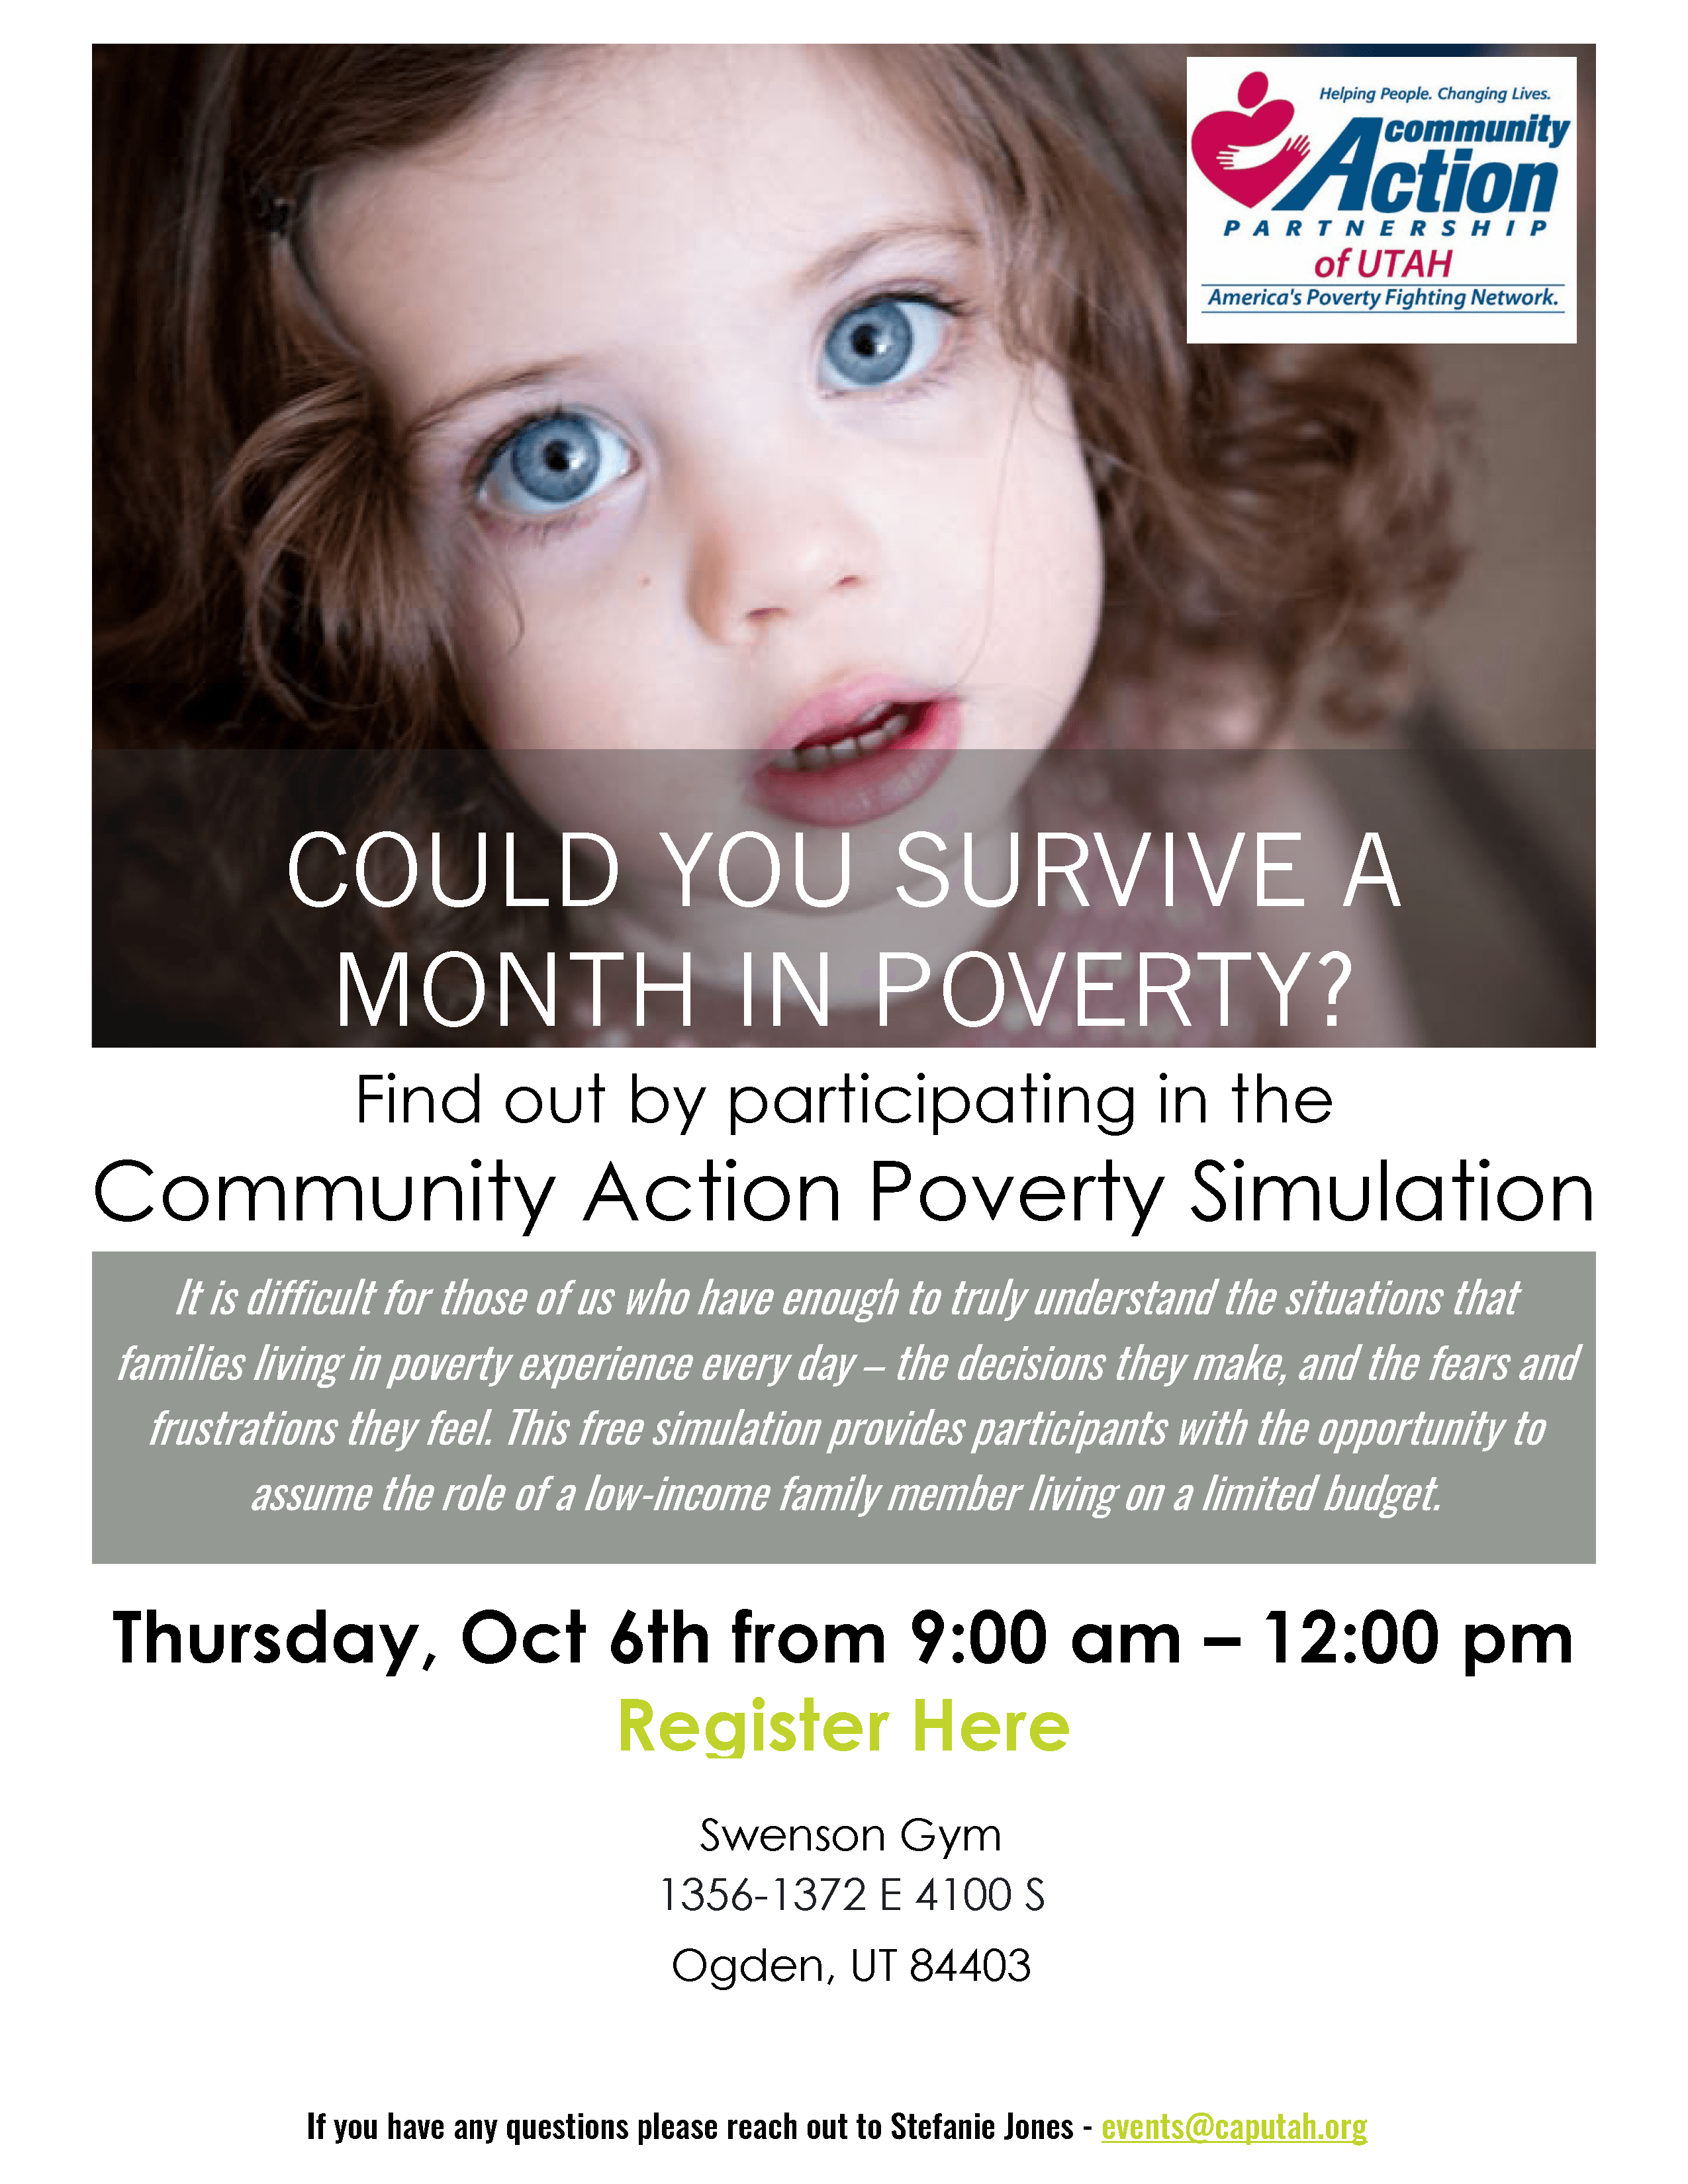 Can You Survive a Month in Poverty - Join Us October 6, 2022 to find out!